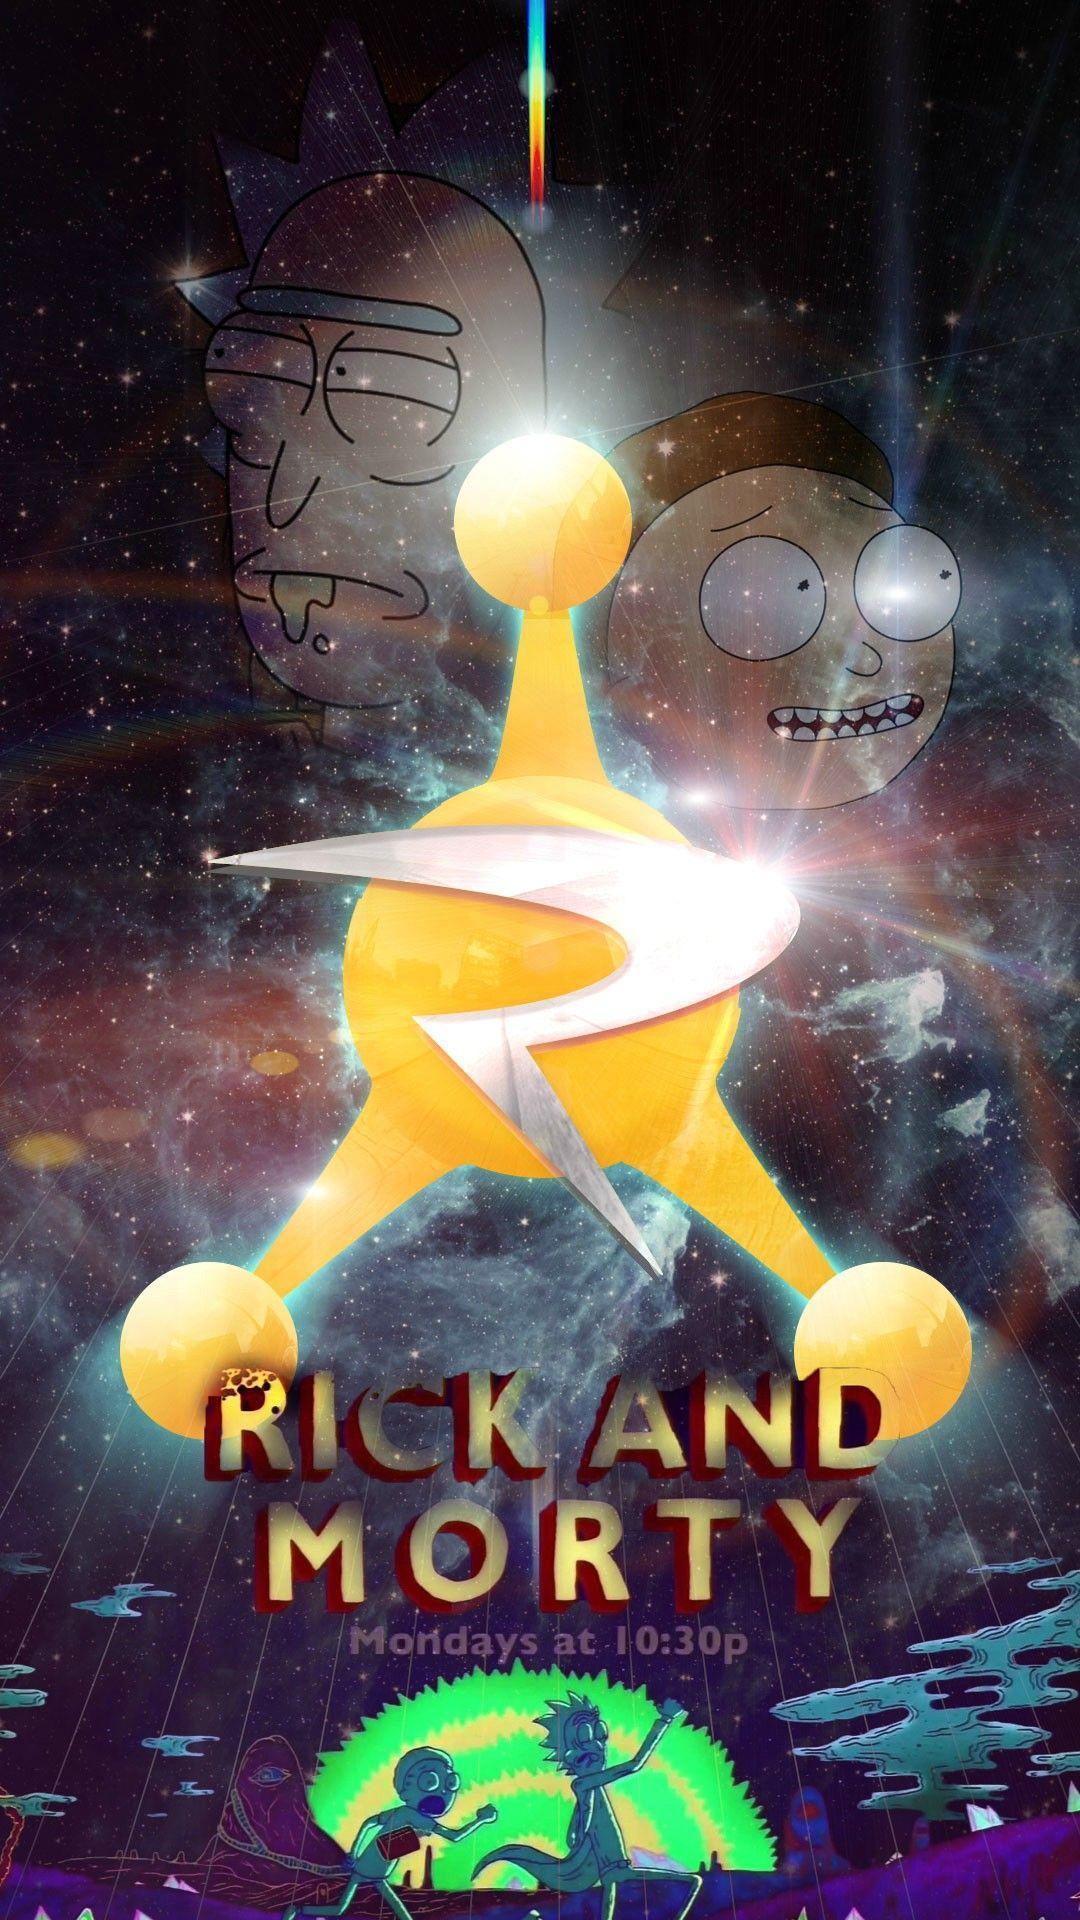 Anybody got any other Rick and Morty phone wallpapers? This is my